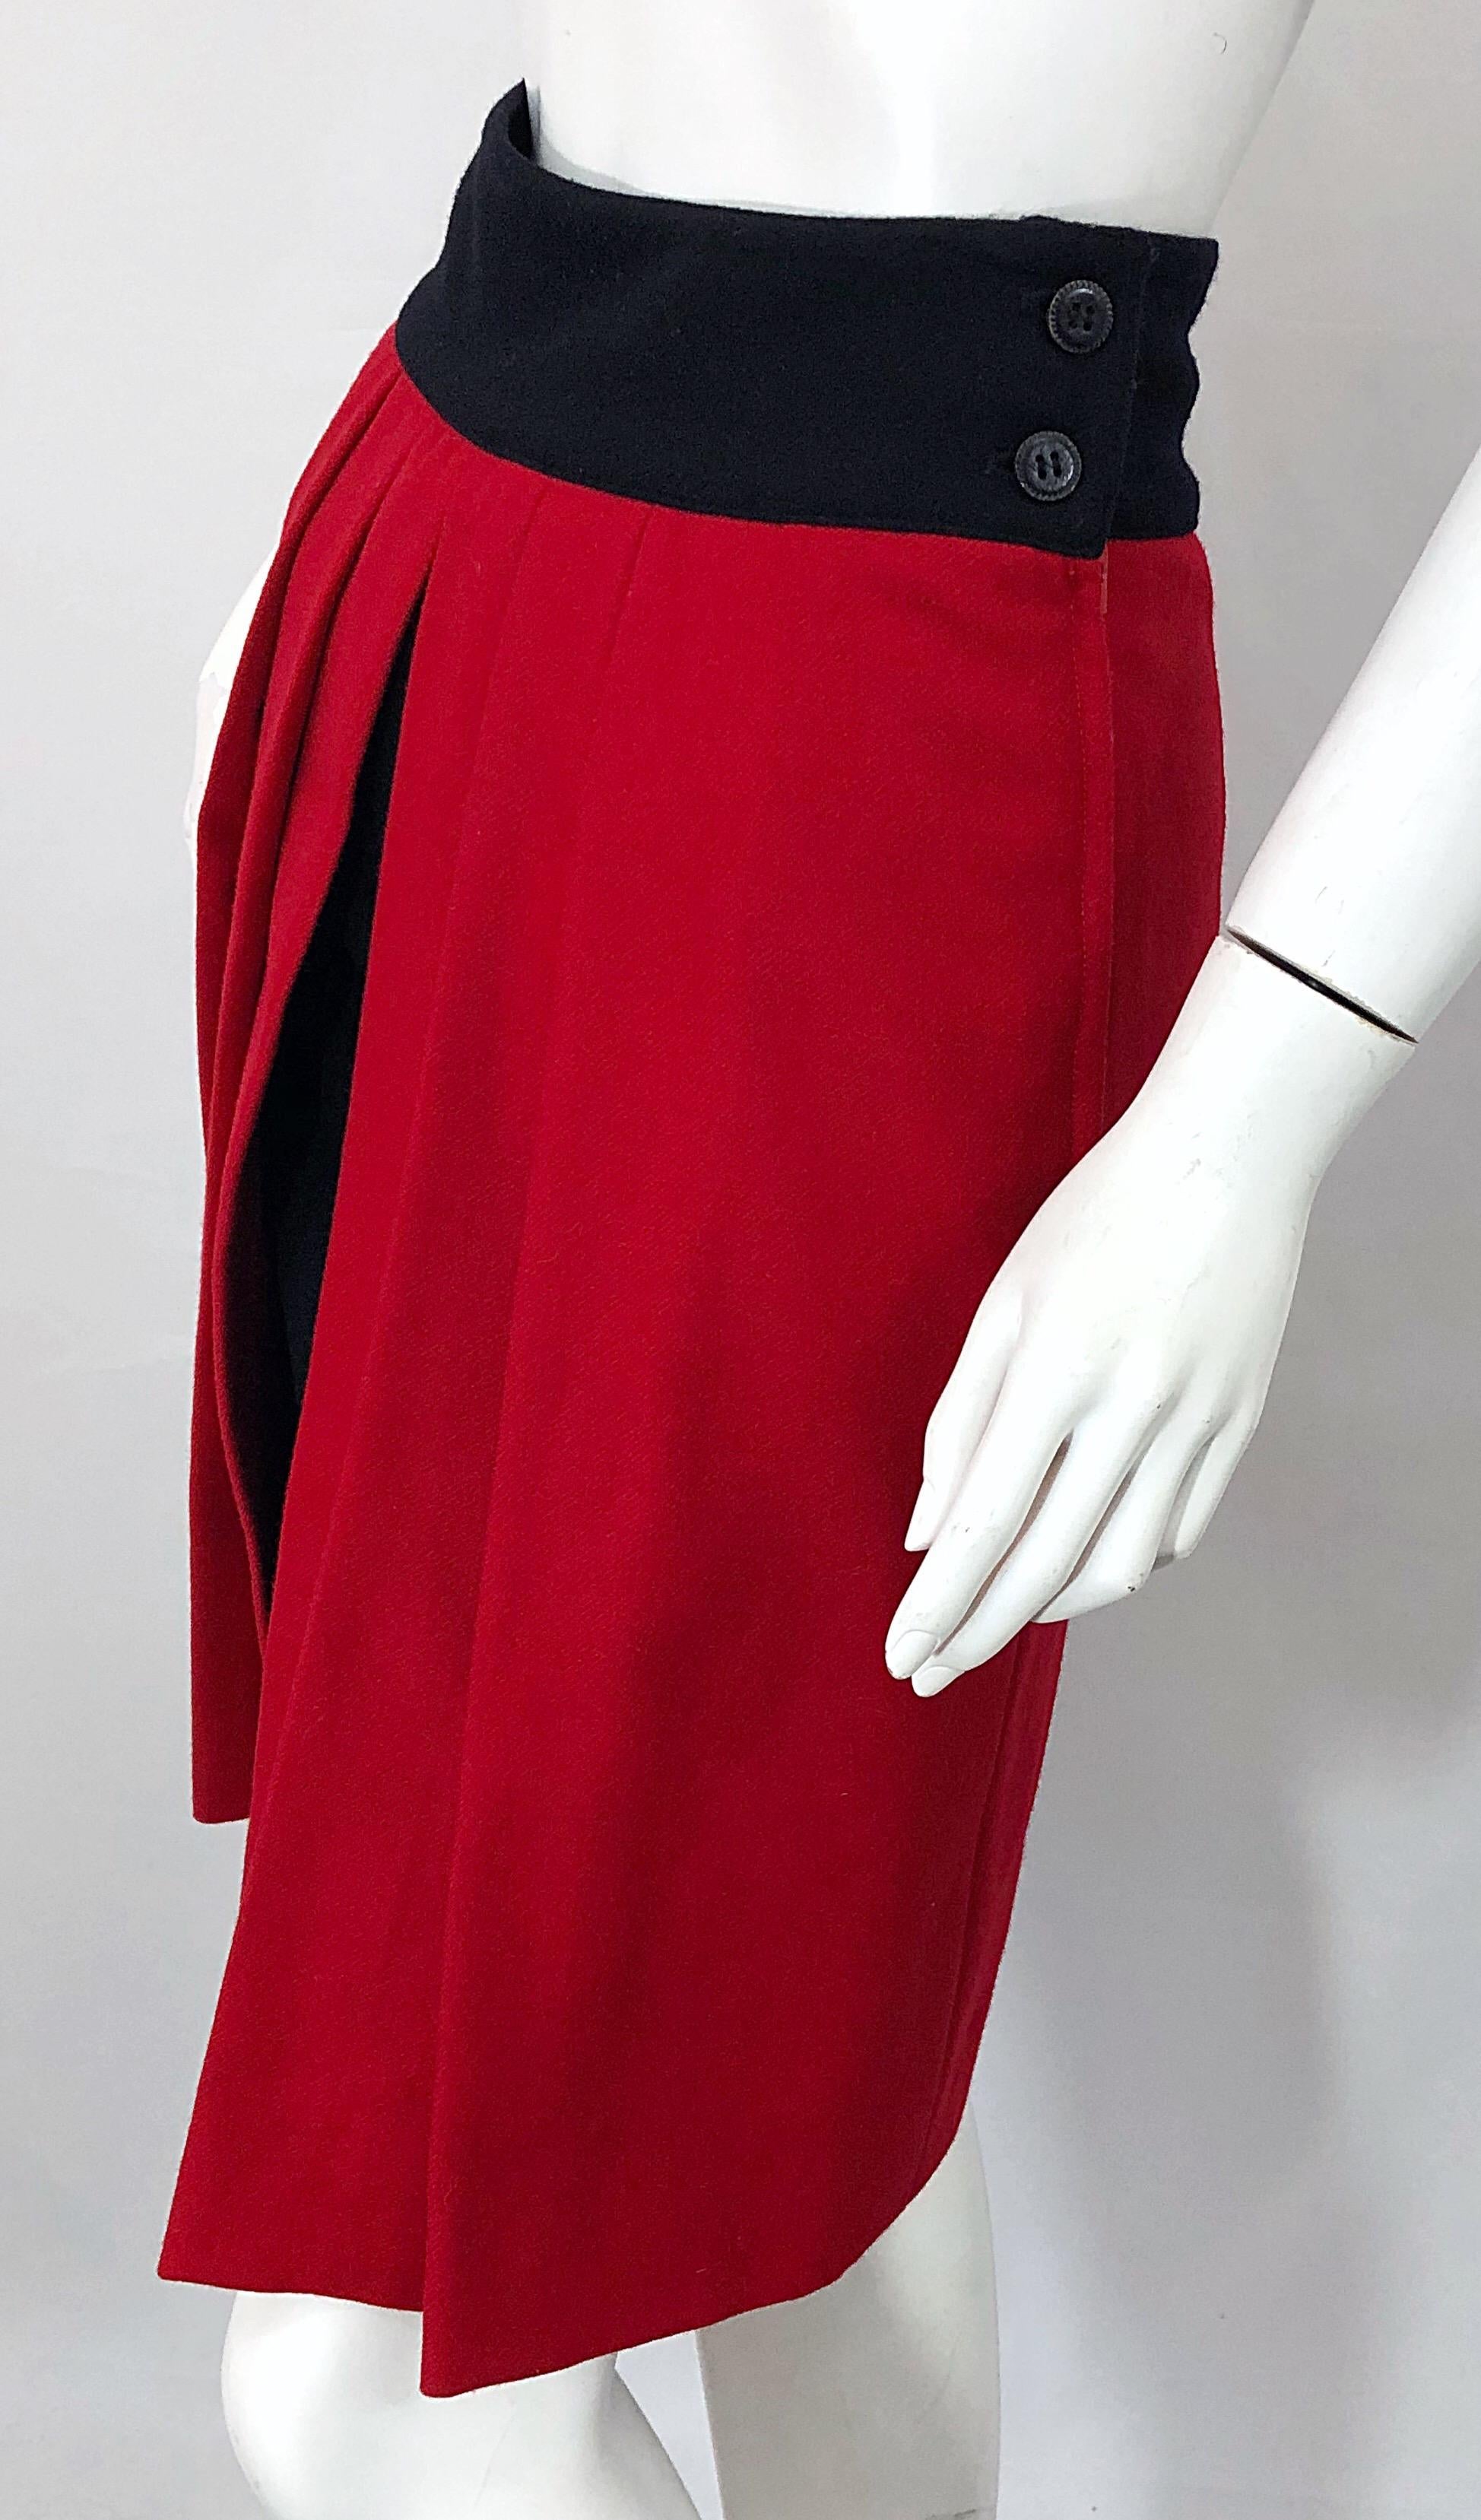 Gianni Versace for Genny Lipstick Red + Black 1980s Vintage 80s Pencil Skirt  For Sale 1